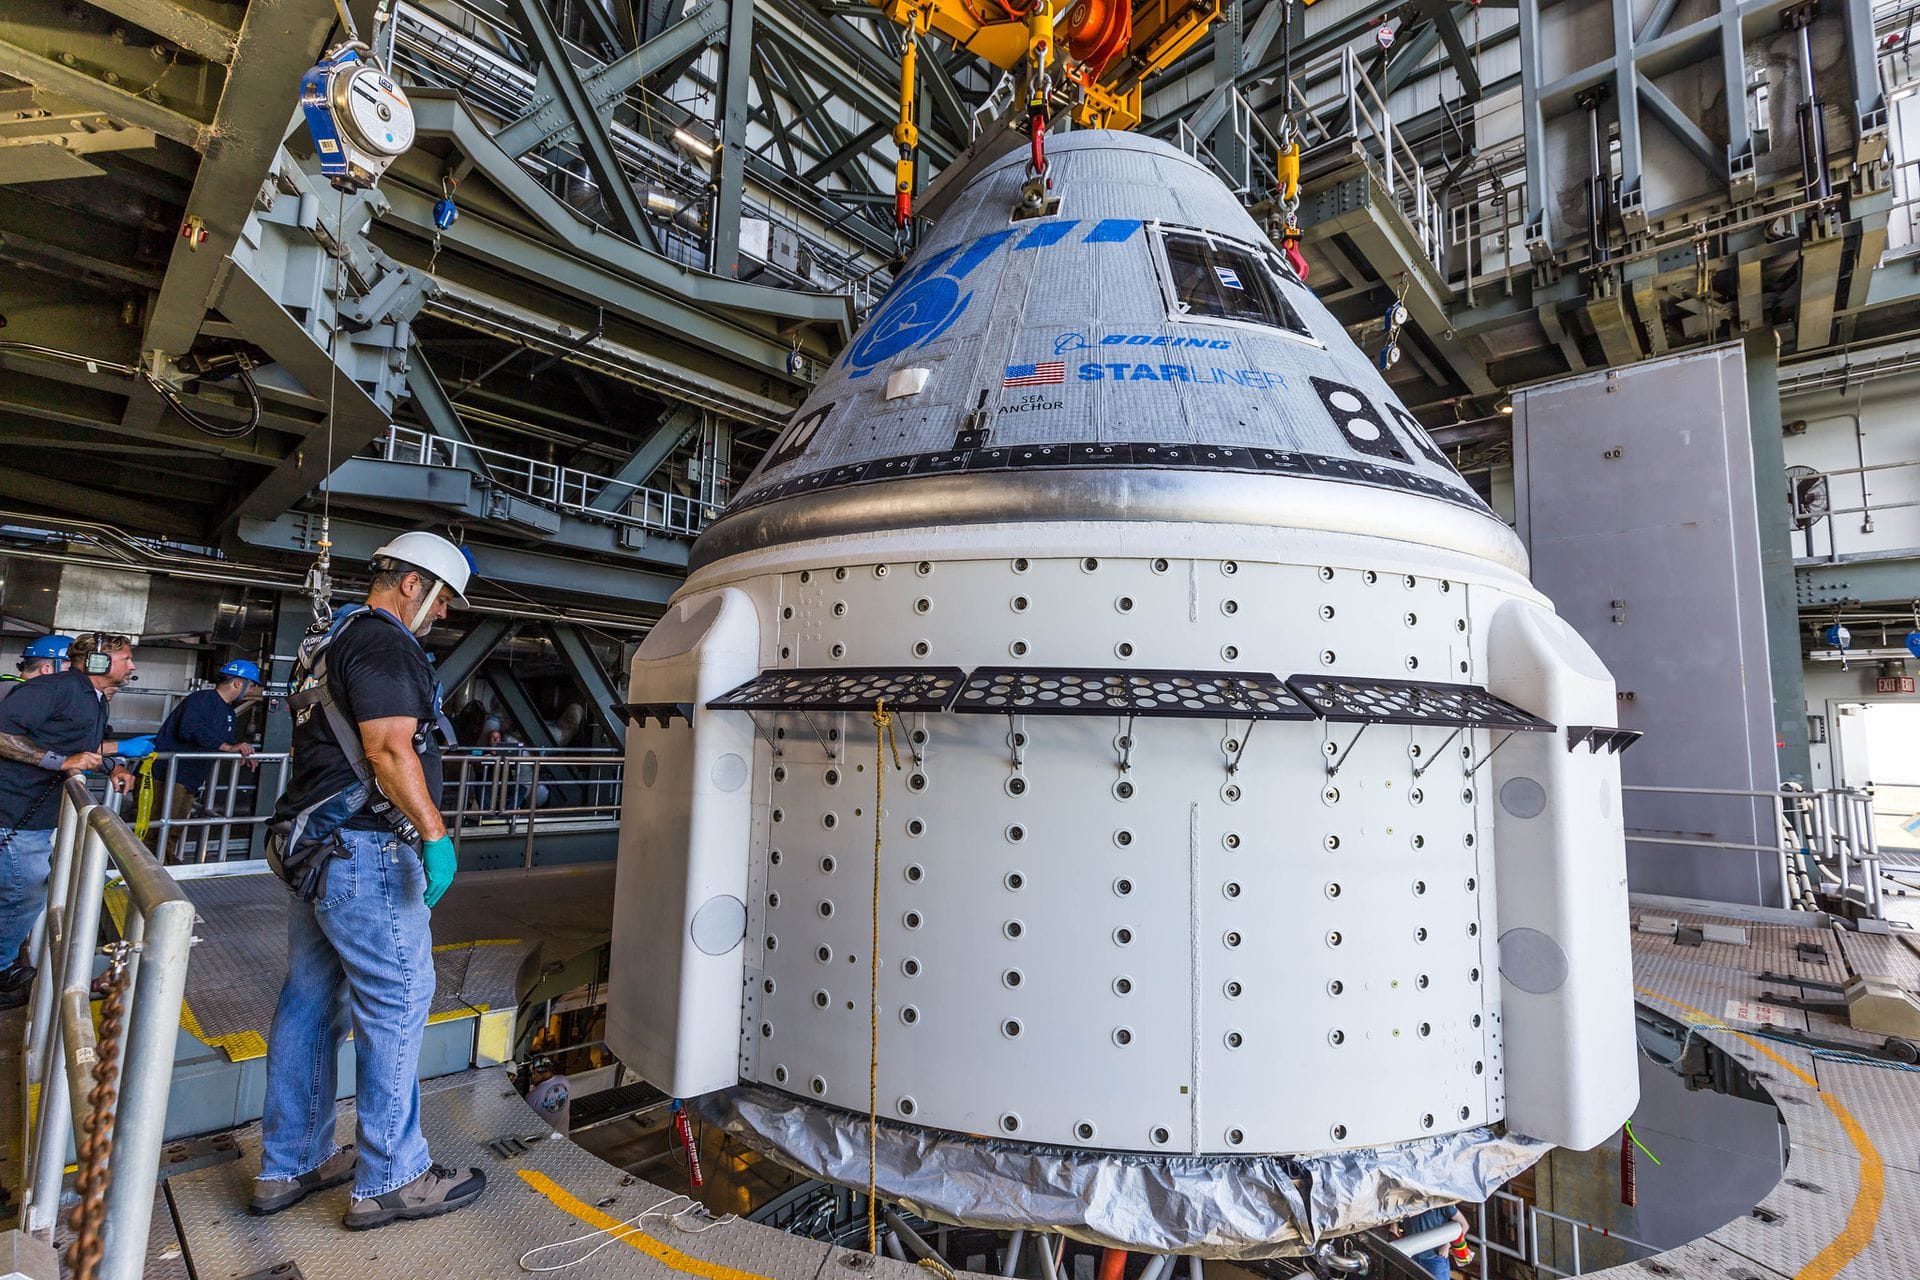 Boeing's Starliner during integration atop of an Atlas V rocket. ©United Launch Alliance